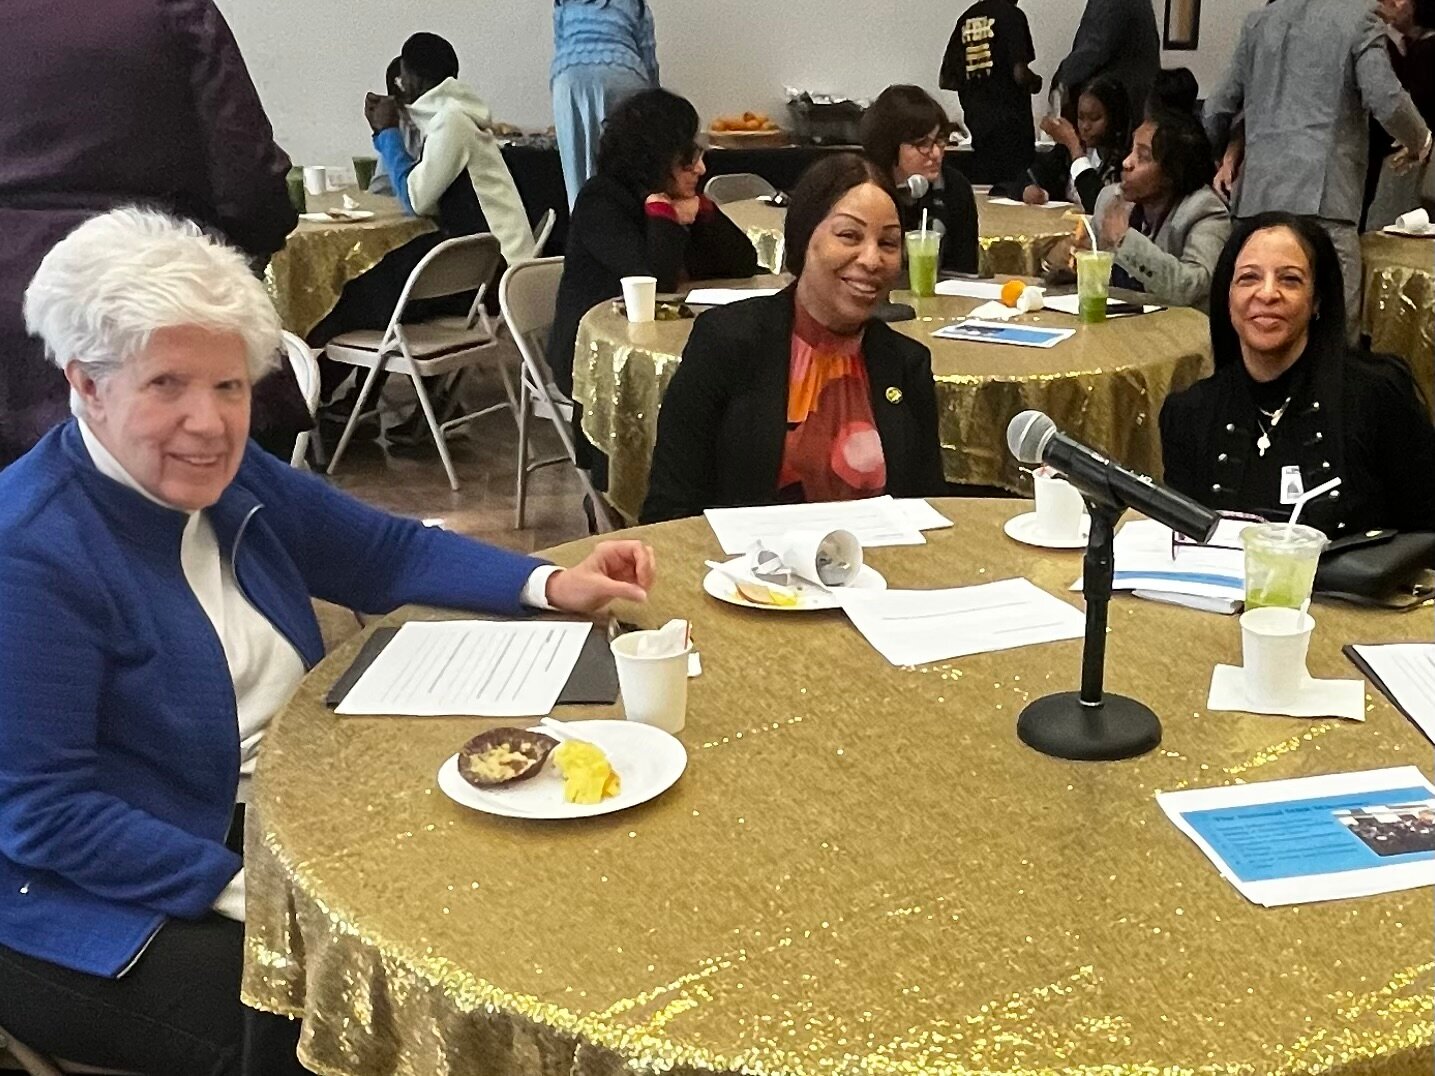 A table full of community leaders recognized by the Uniondale school district for all of their work within the neighborhood. From left: Barbara Powell, from St. Martha’s Social Ministry in Uniondale, Dr. Cecelia Bonner of the Uniondale School District, and Pearl Jacobs, community activist and president of the Nostrand Gardens Civic Association.